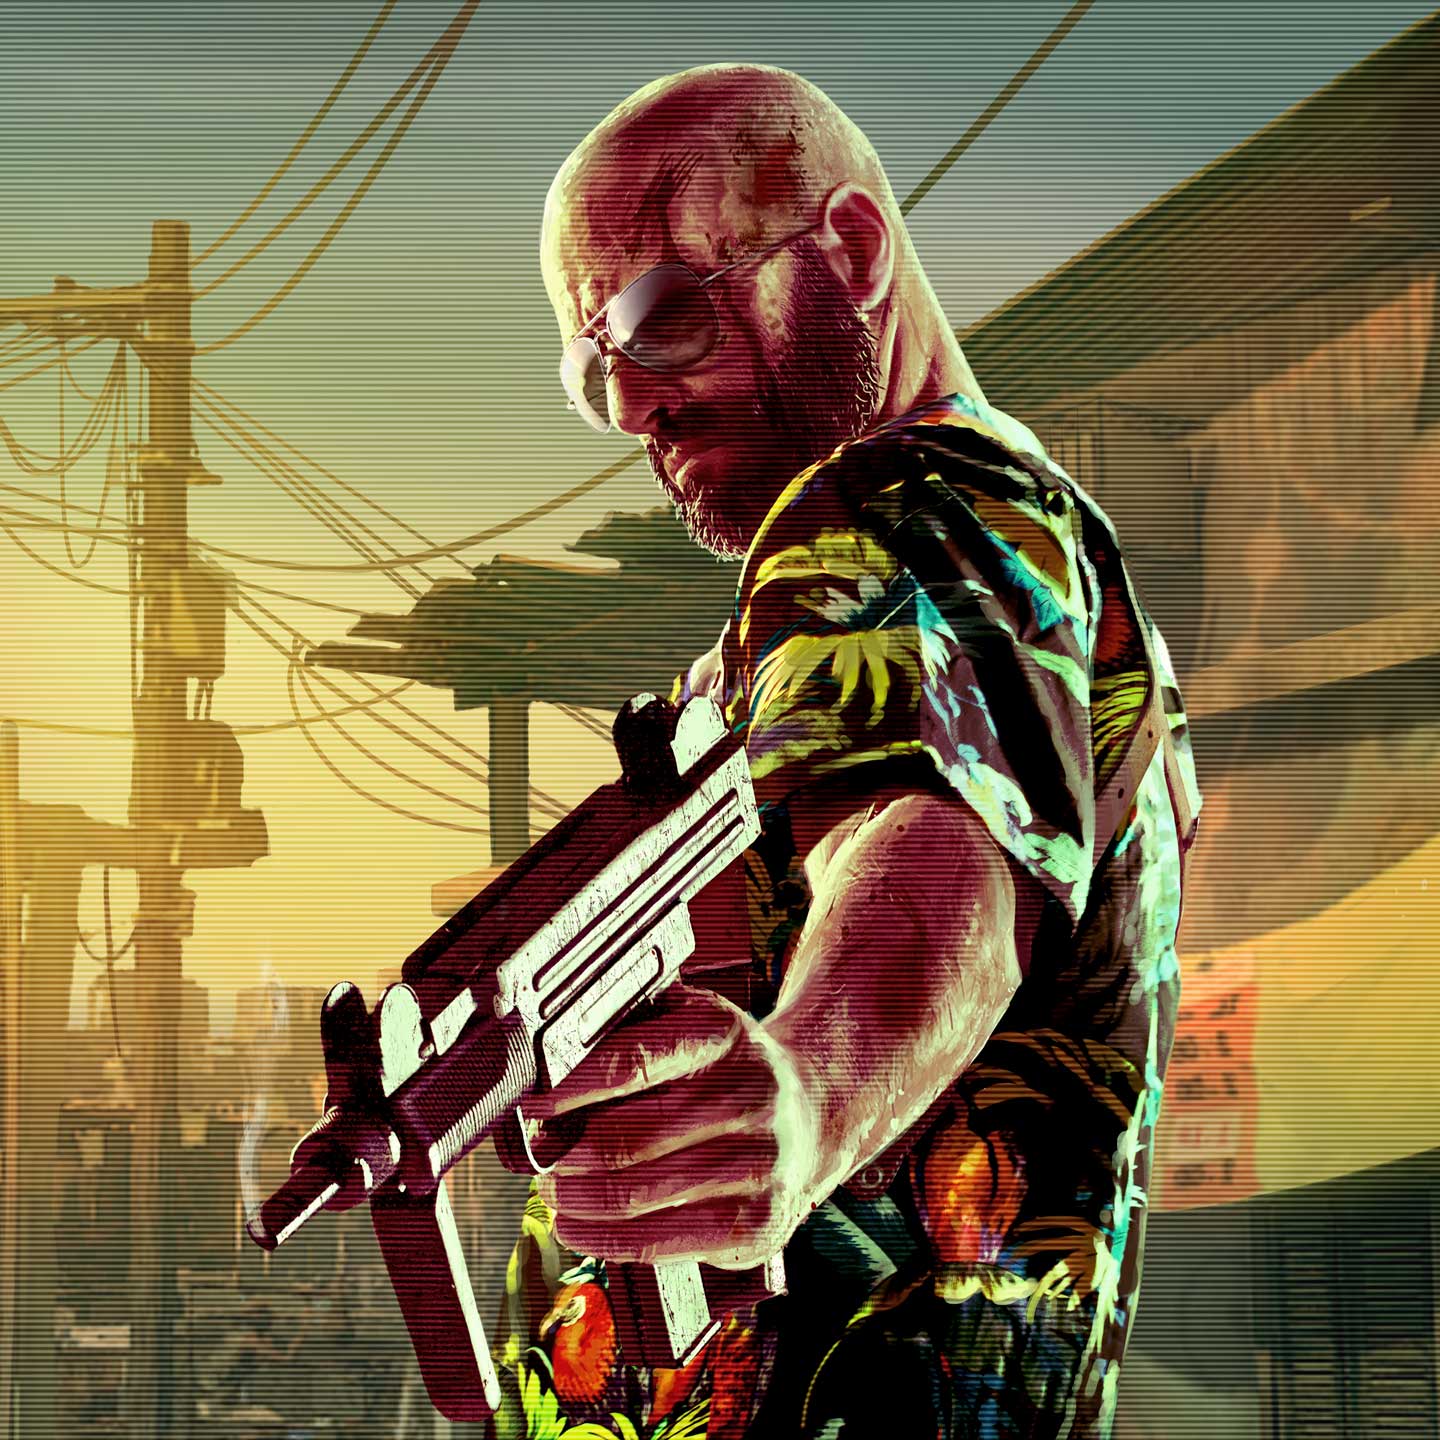 Max Payne 3 – preview, Games